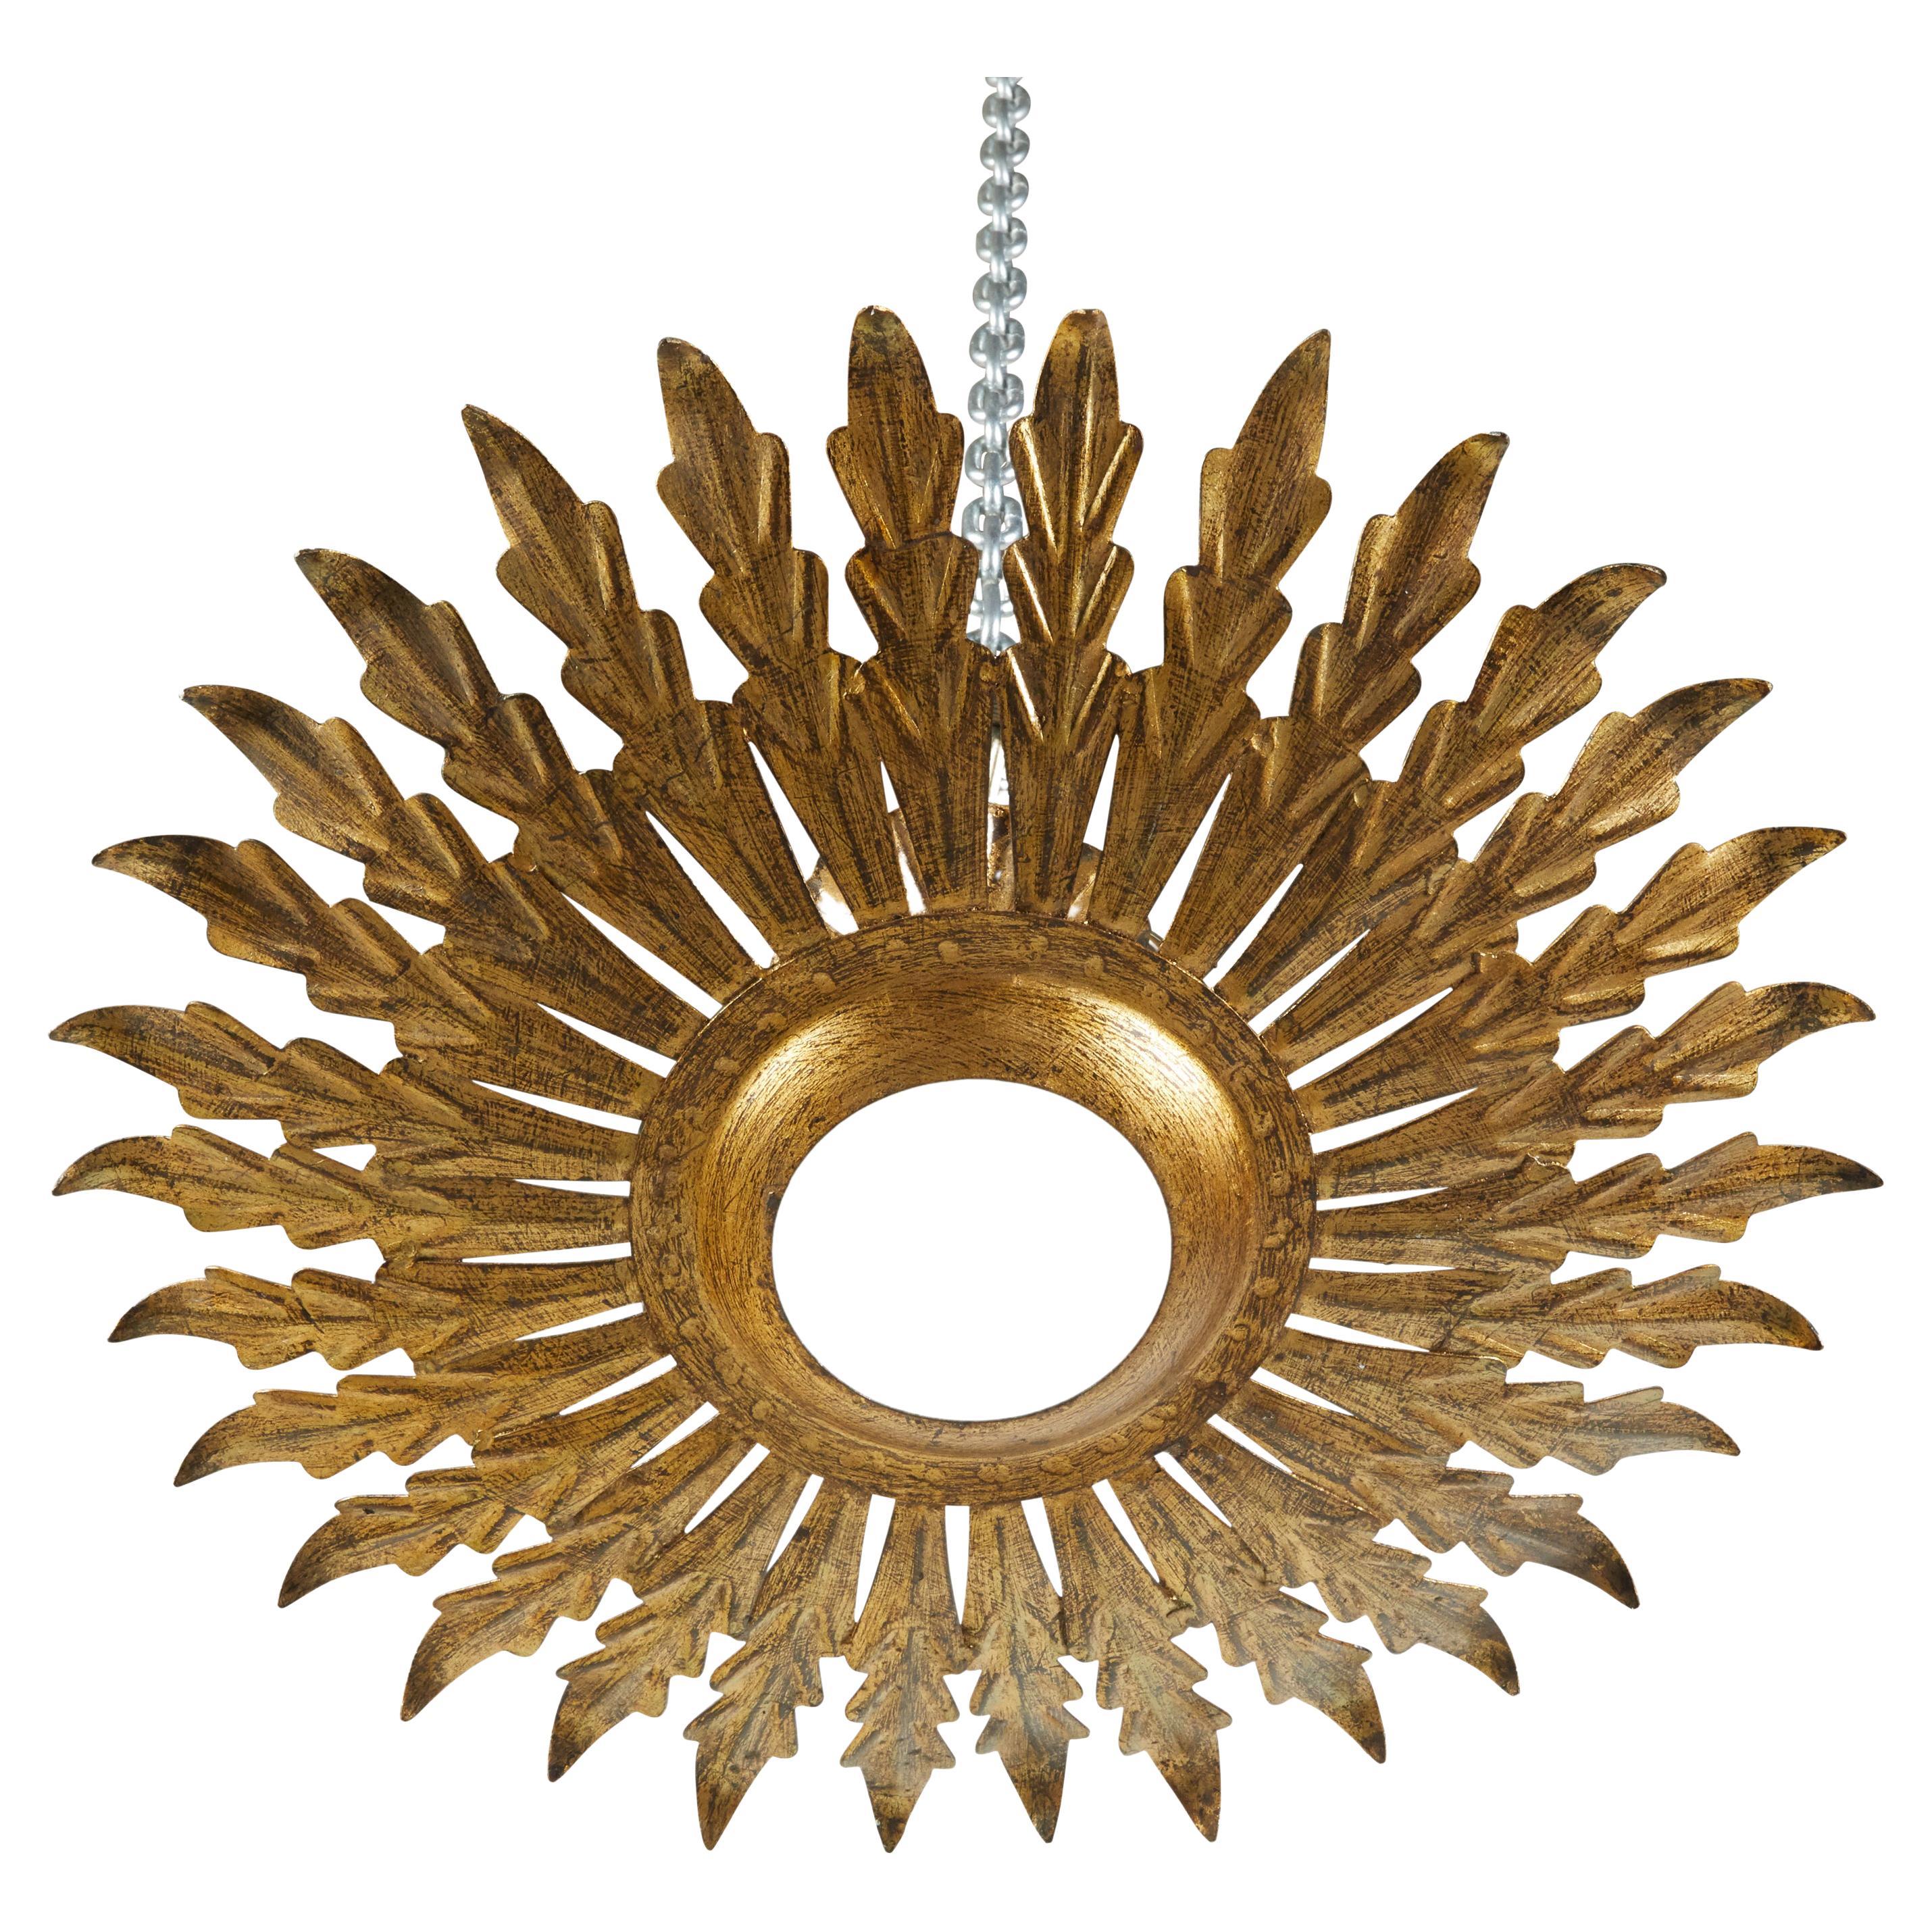 A vintage Spanish gilt metal single light crown chandelier from the mid-20th century, with leaf motifs, frosted glass and distressed patina. Created in Spain during the midcentury period, this crown chandelier features a circular body adorned with a